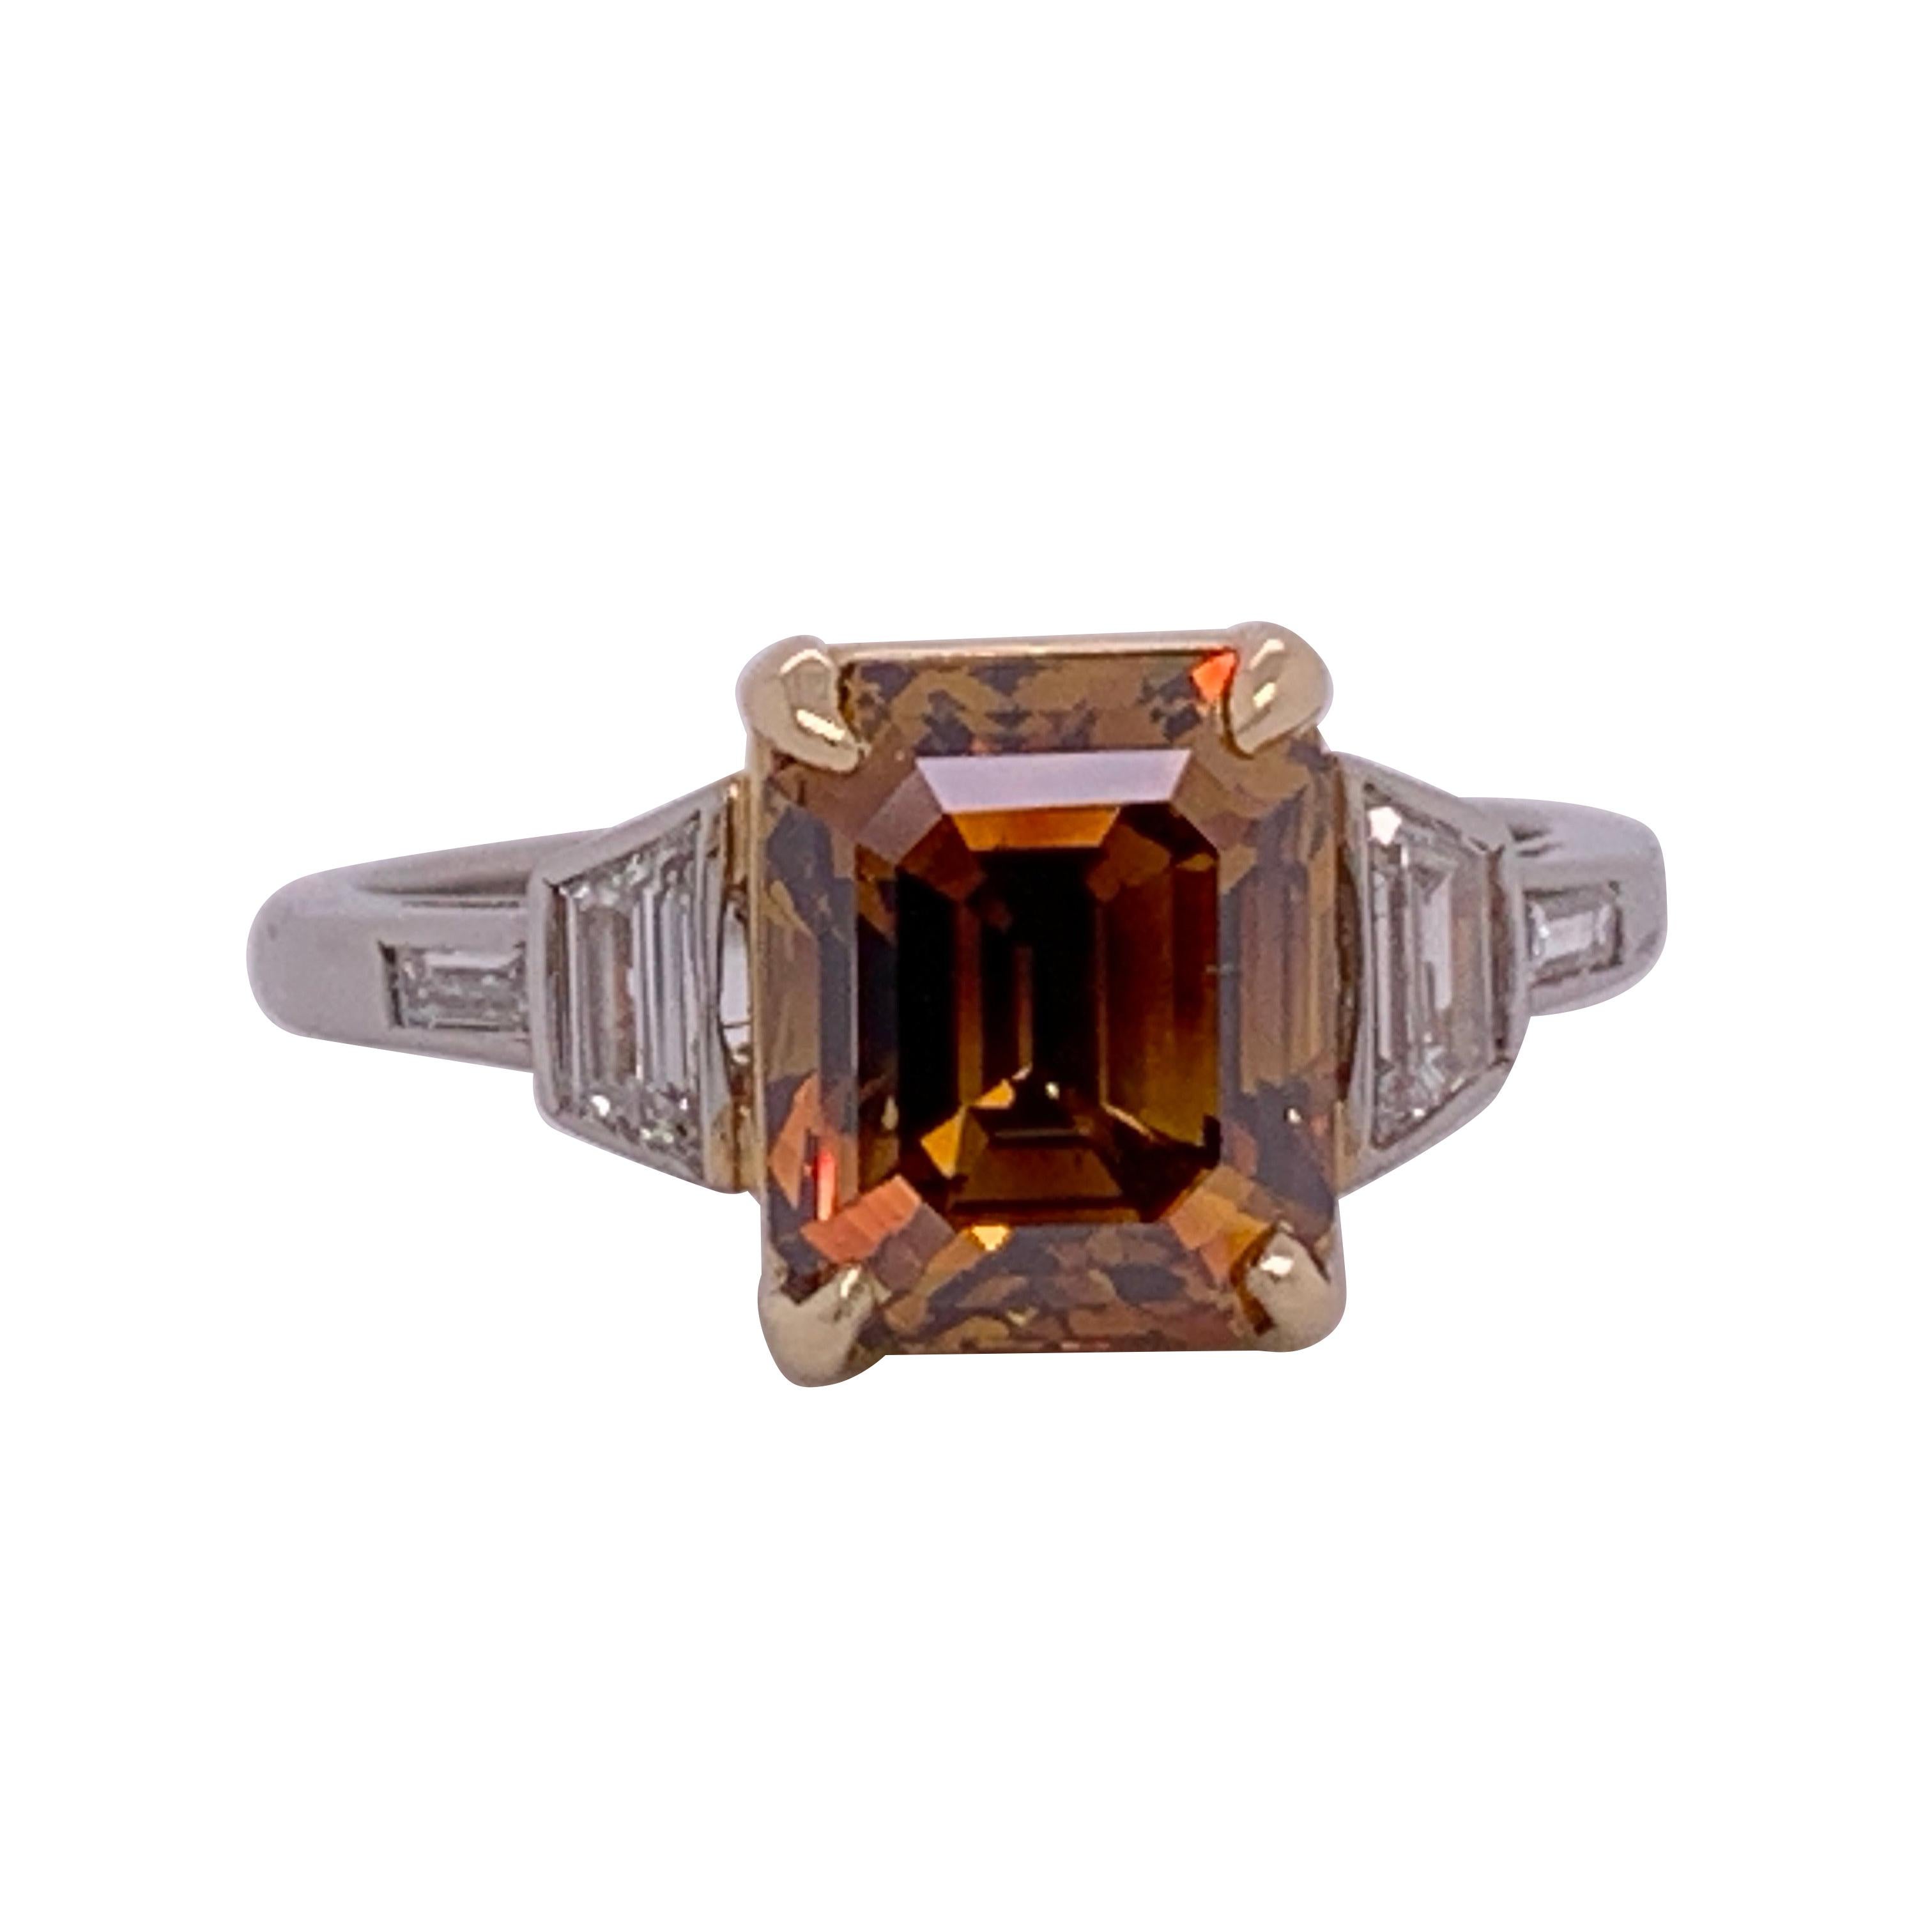 A rare Deep Orange-Brown Emerald Cut weighing 3.37 carat and certified by the GIA as an SI1 in clarity. Pleasant rectangular shape and extraordinary color. Ring is a size 6.25. The platinum ring contains approximately 0.35cts. 